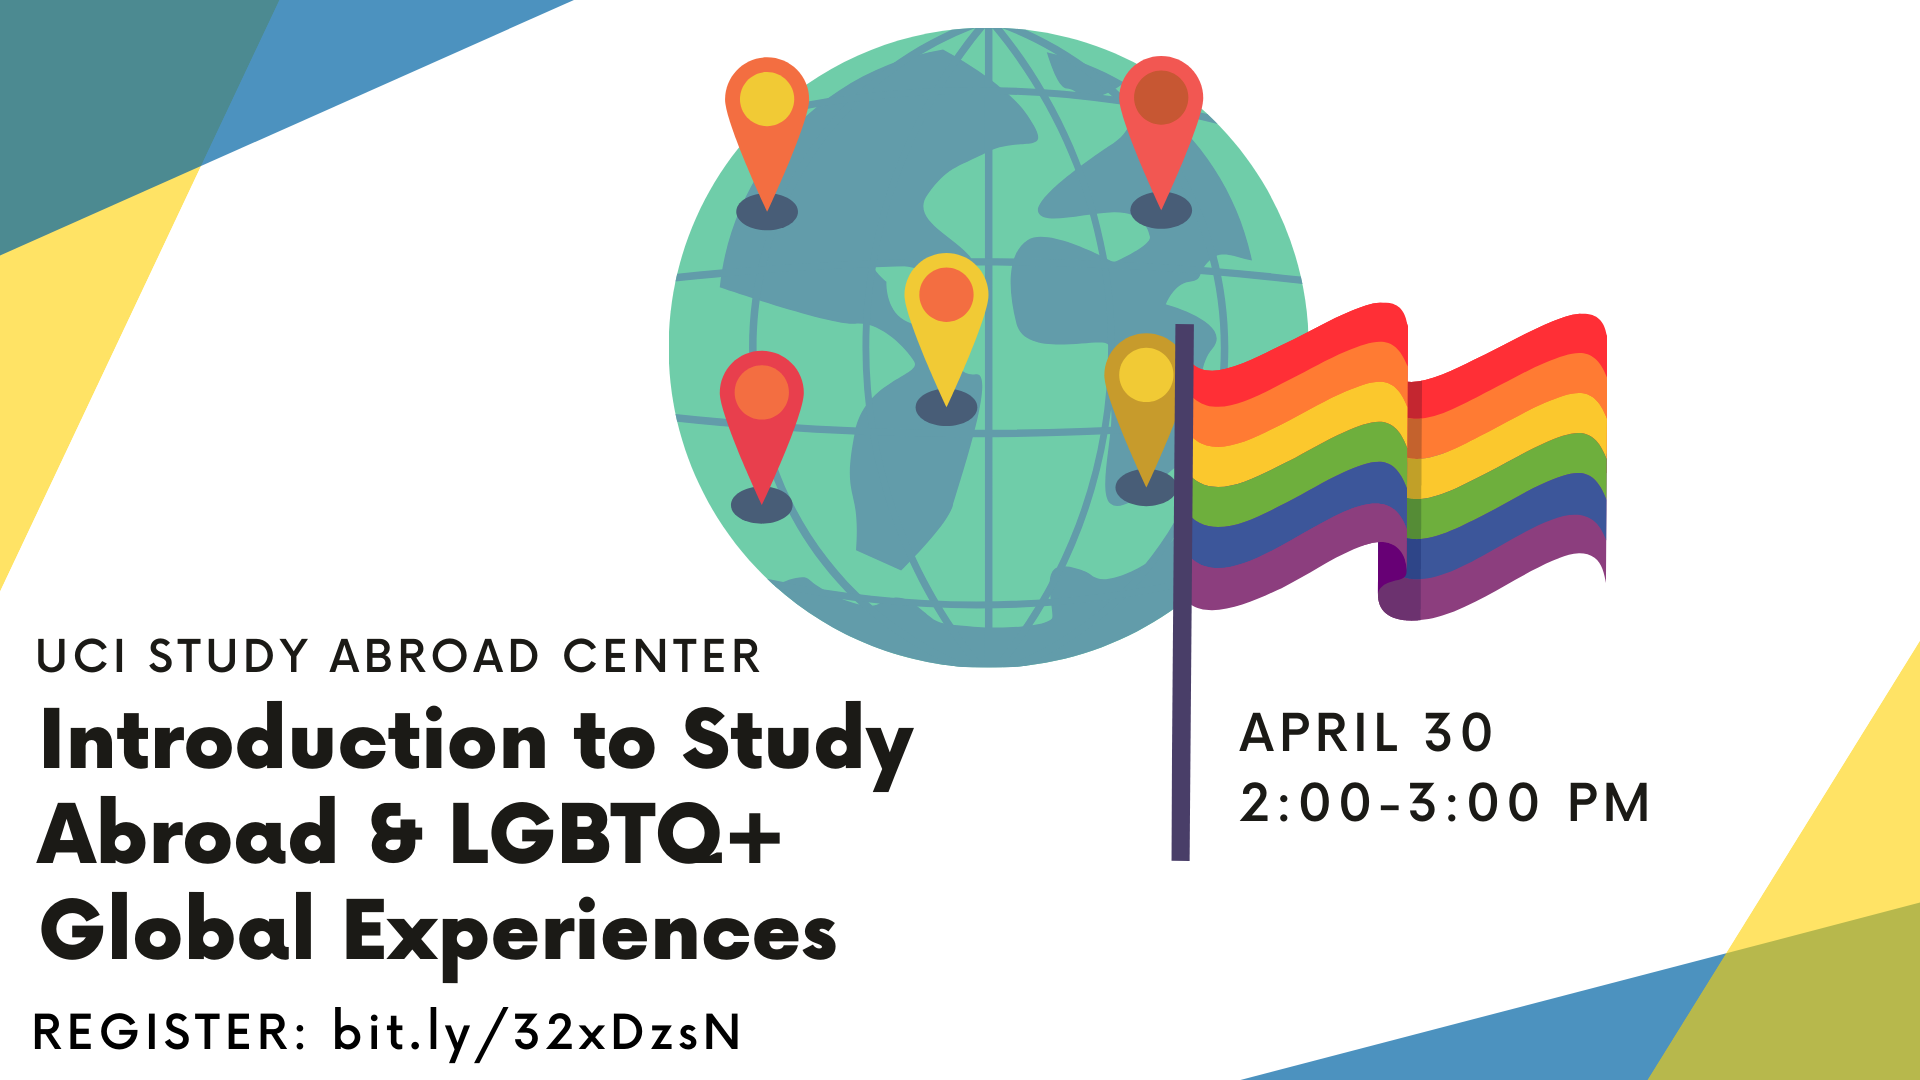 Introduction to Study Abroad and LGBTQ+ Global Experiences